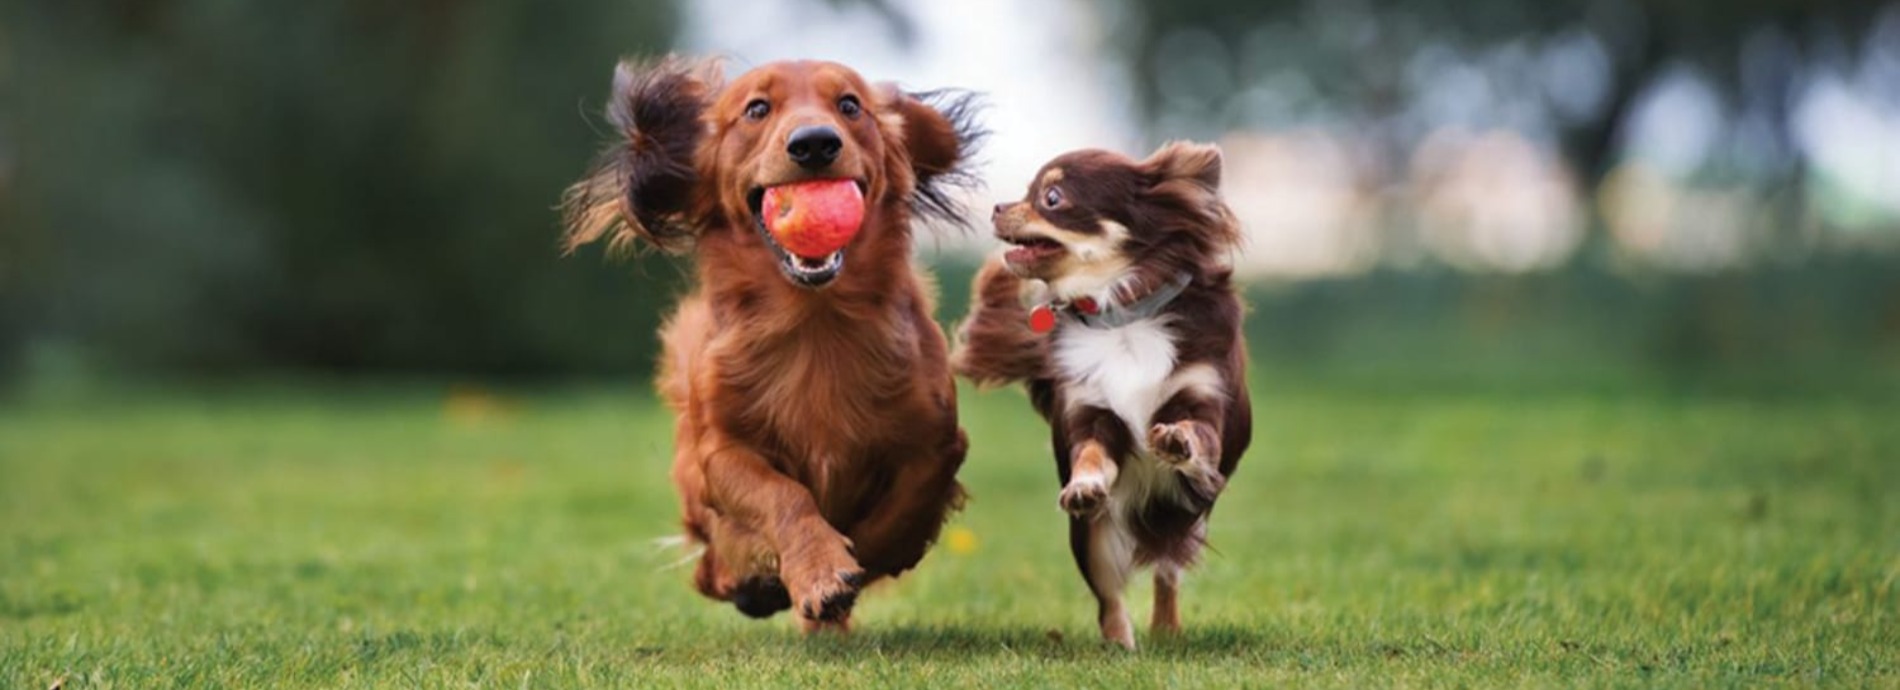 2 dogs running beside each other, one has a ball in it's mouth